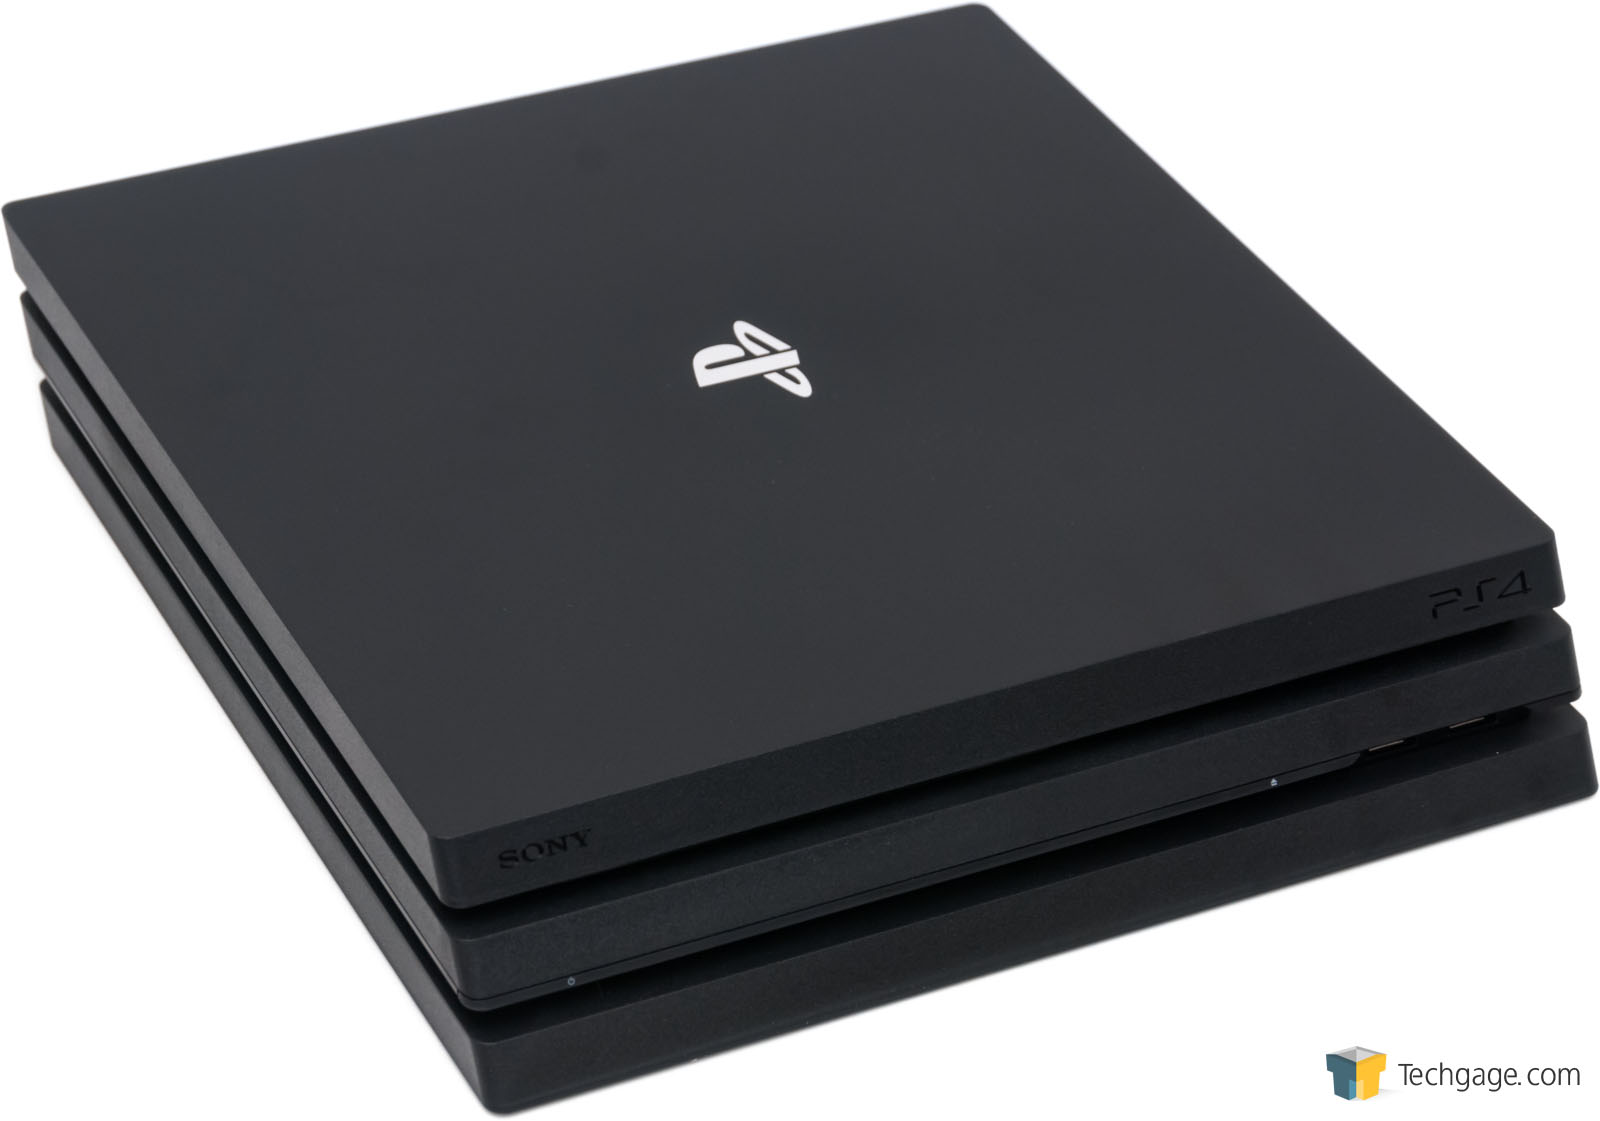 PS4 Pro Review